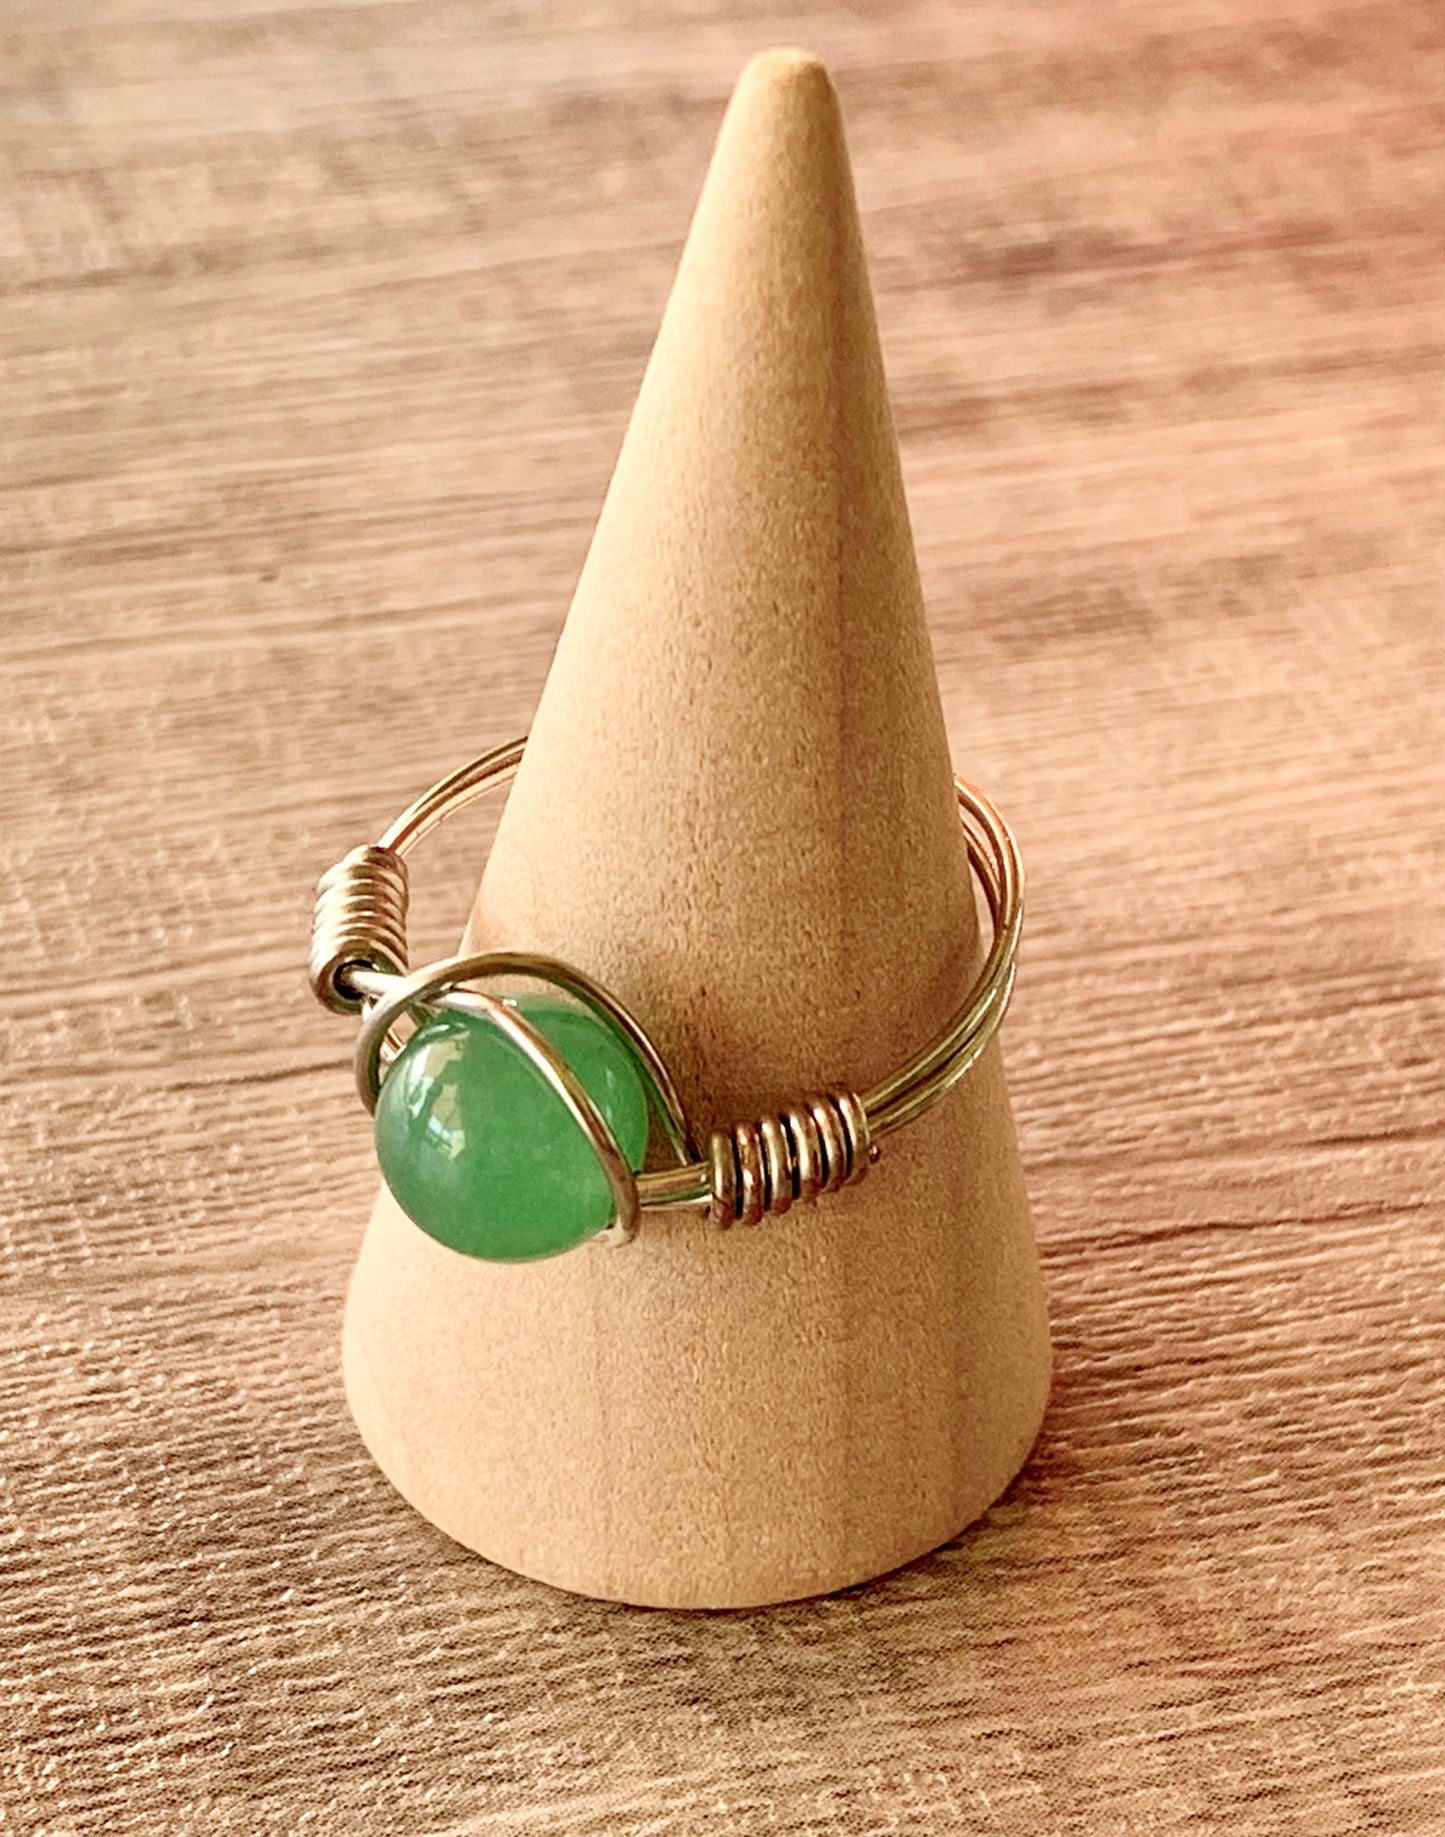 Judith Handmade Green Aventurine Wire Wrapped Ring Size 6